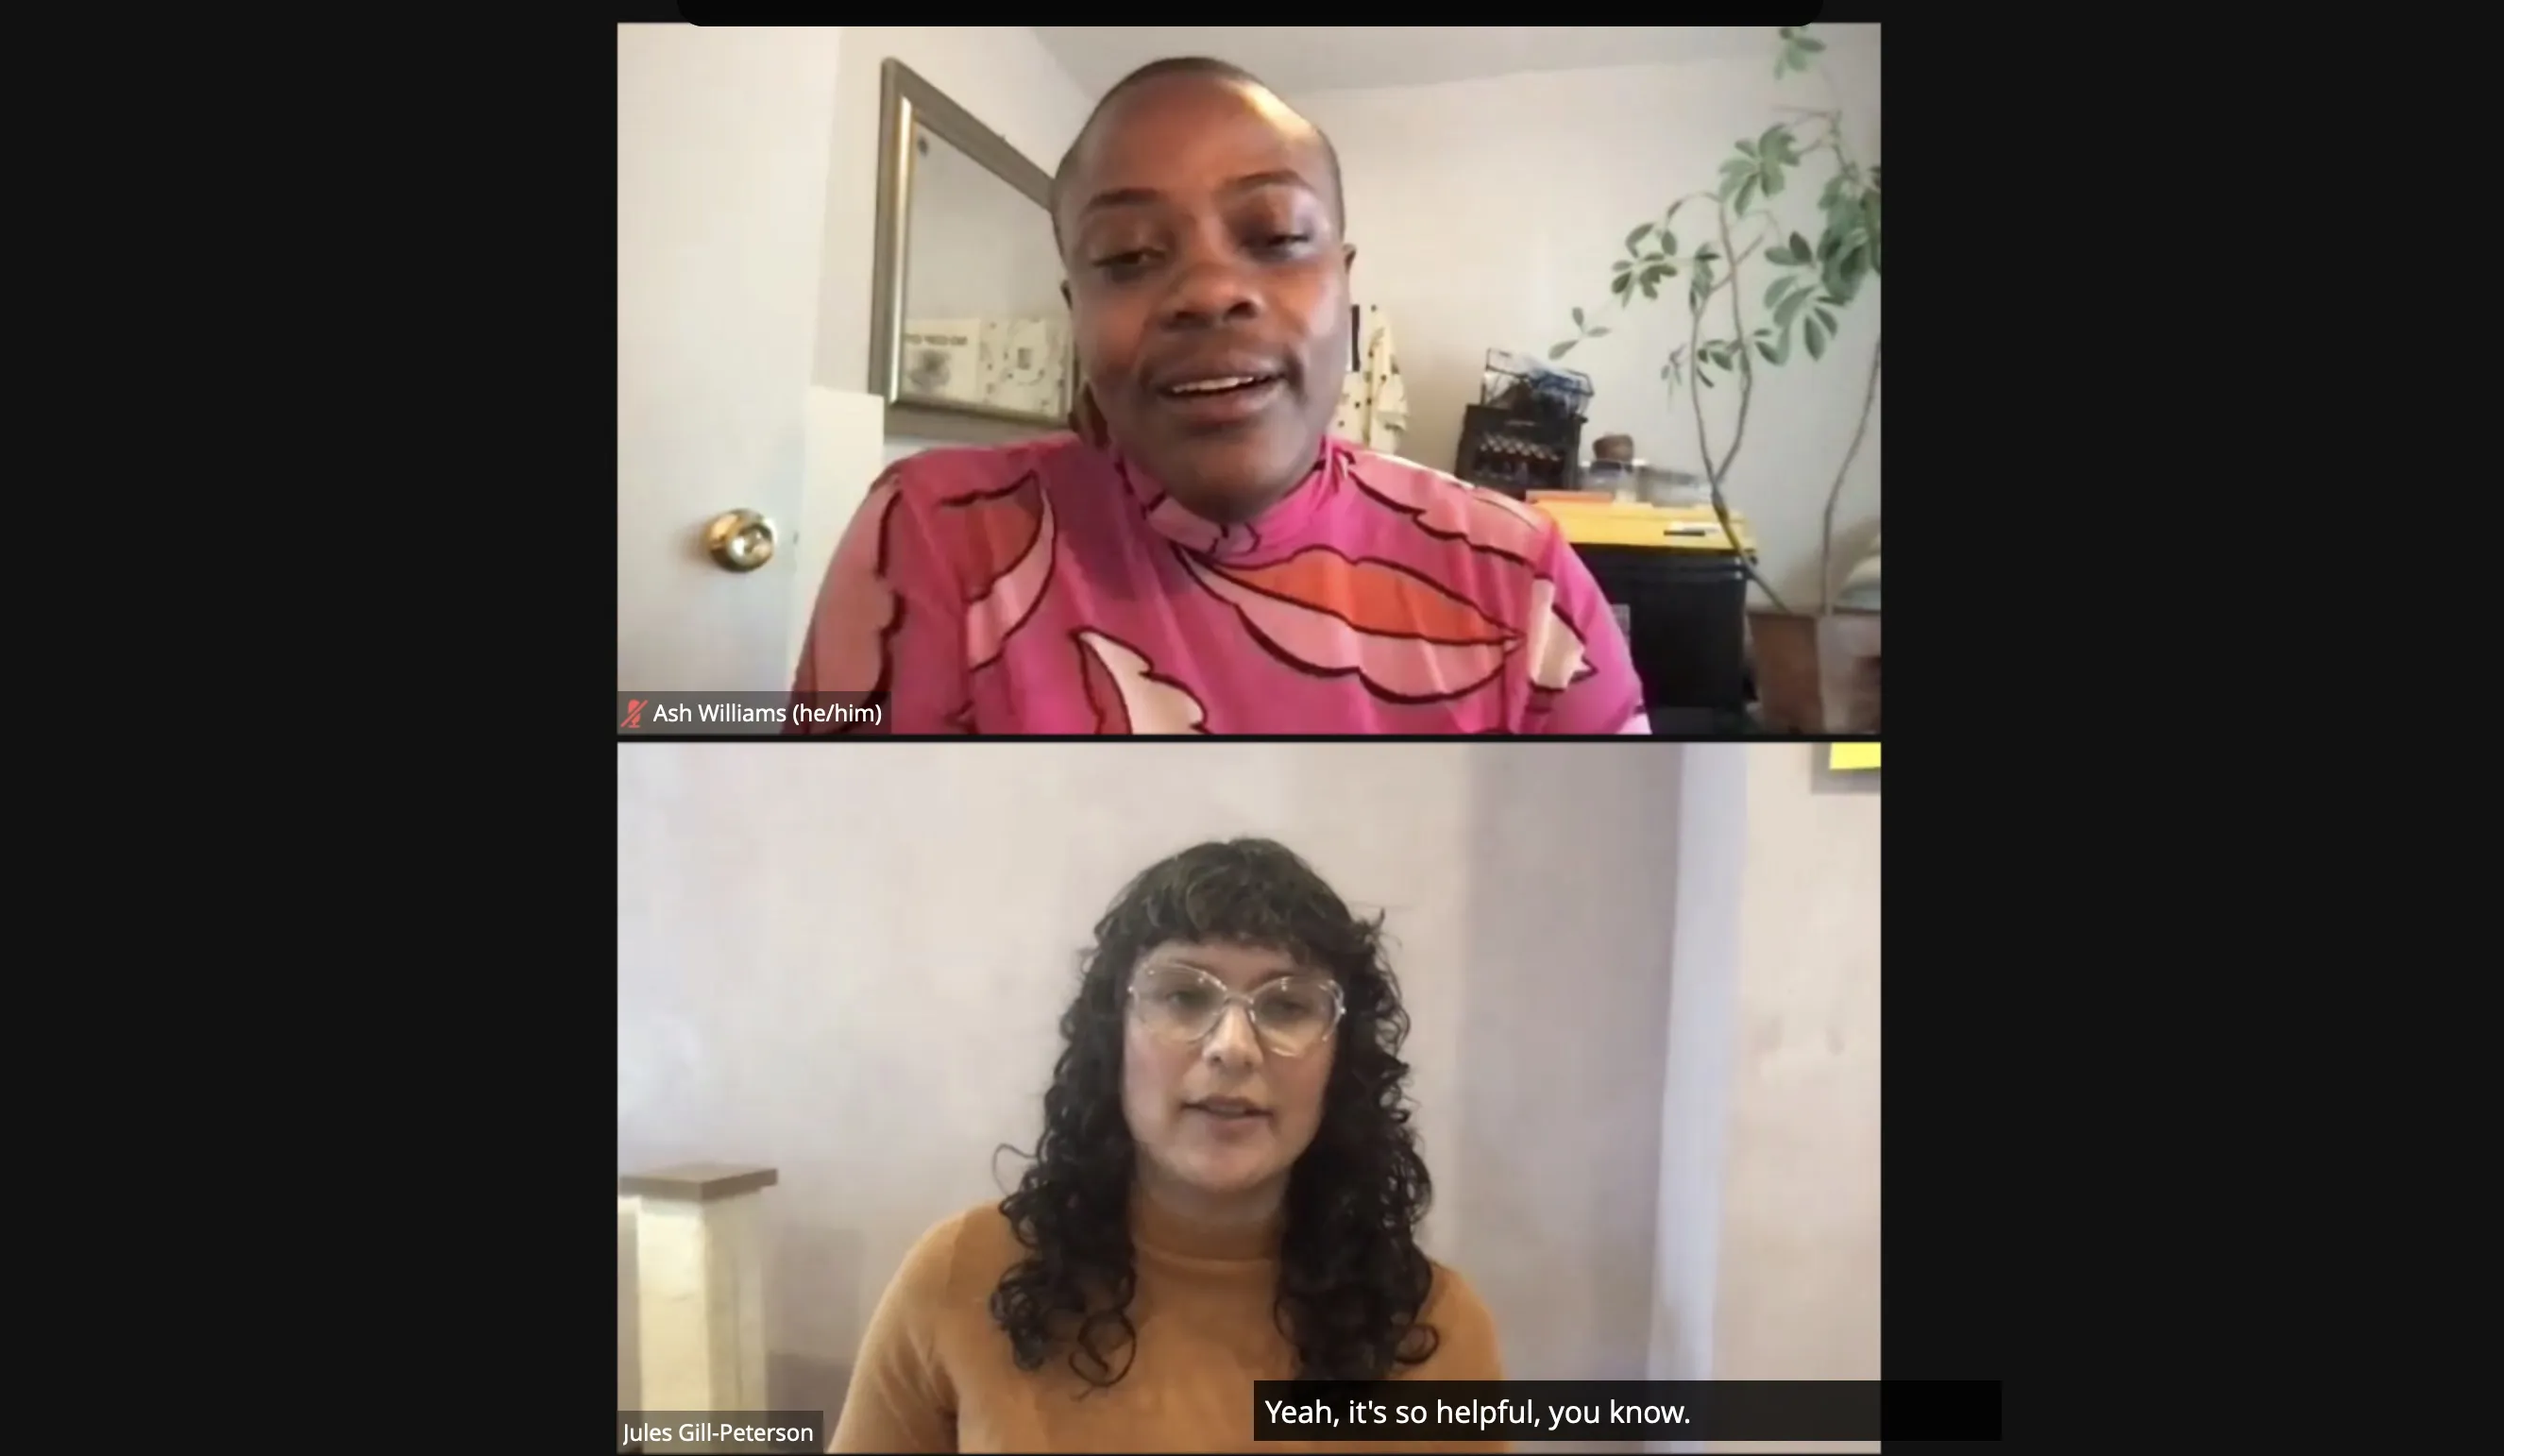 A Notre Dame series titled “Reproductive Justice: Scholarship for Solidarity and Social Change” held an event titled “Trans Care + Abortion Care: Intersections and Questions” on Zoom on March 20, 2023, and drew an audience of about 105 viewers.?w=200&h=150